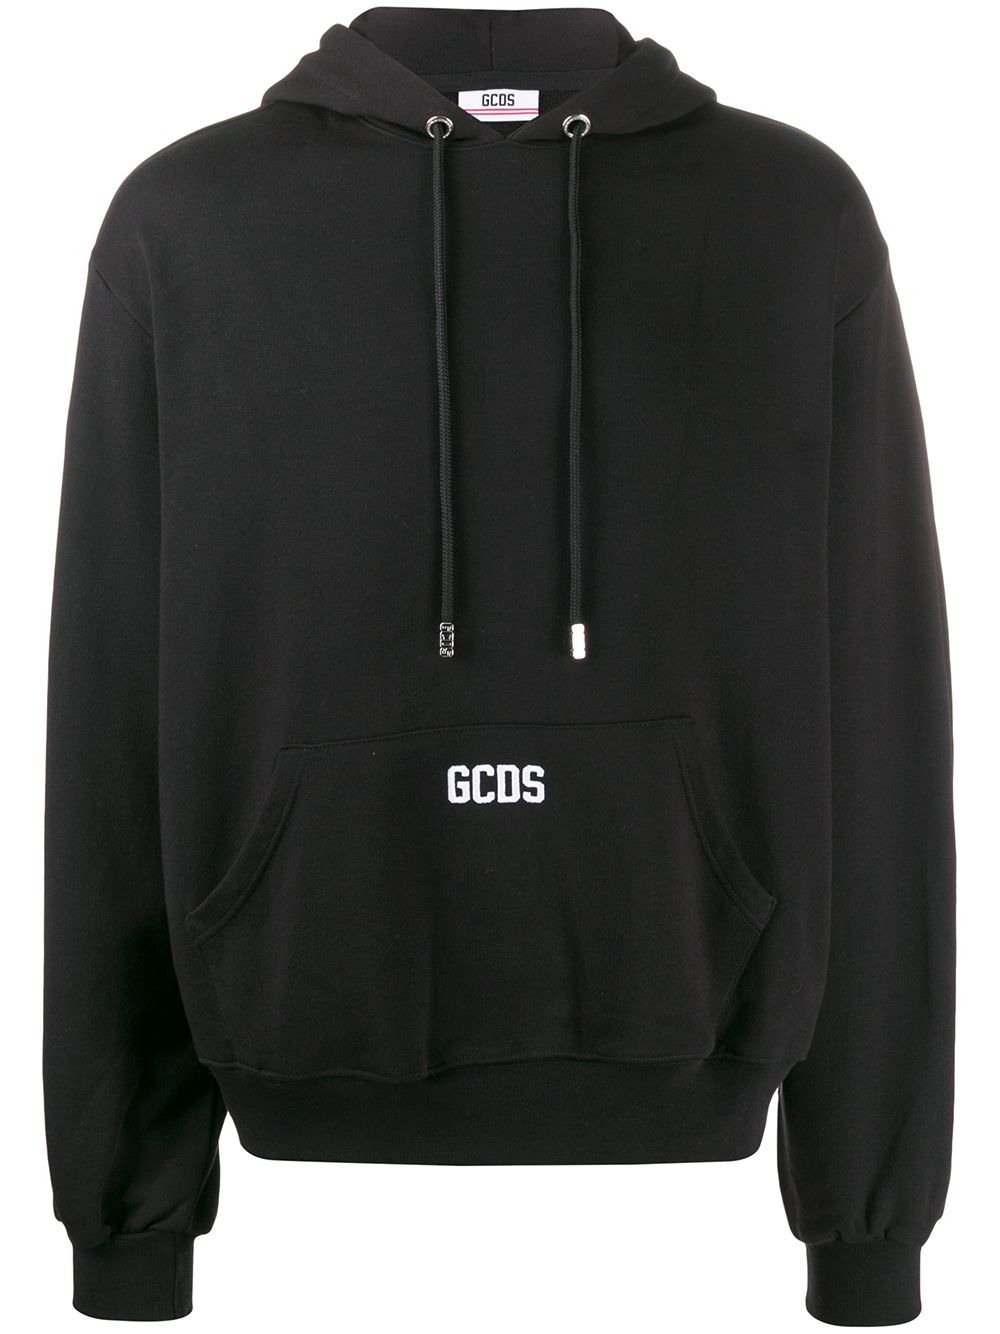 Shop Gcds logo pouch hoodie with Express Delivery - FARFETCH